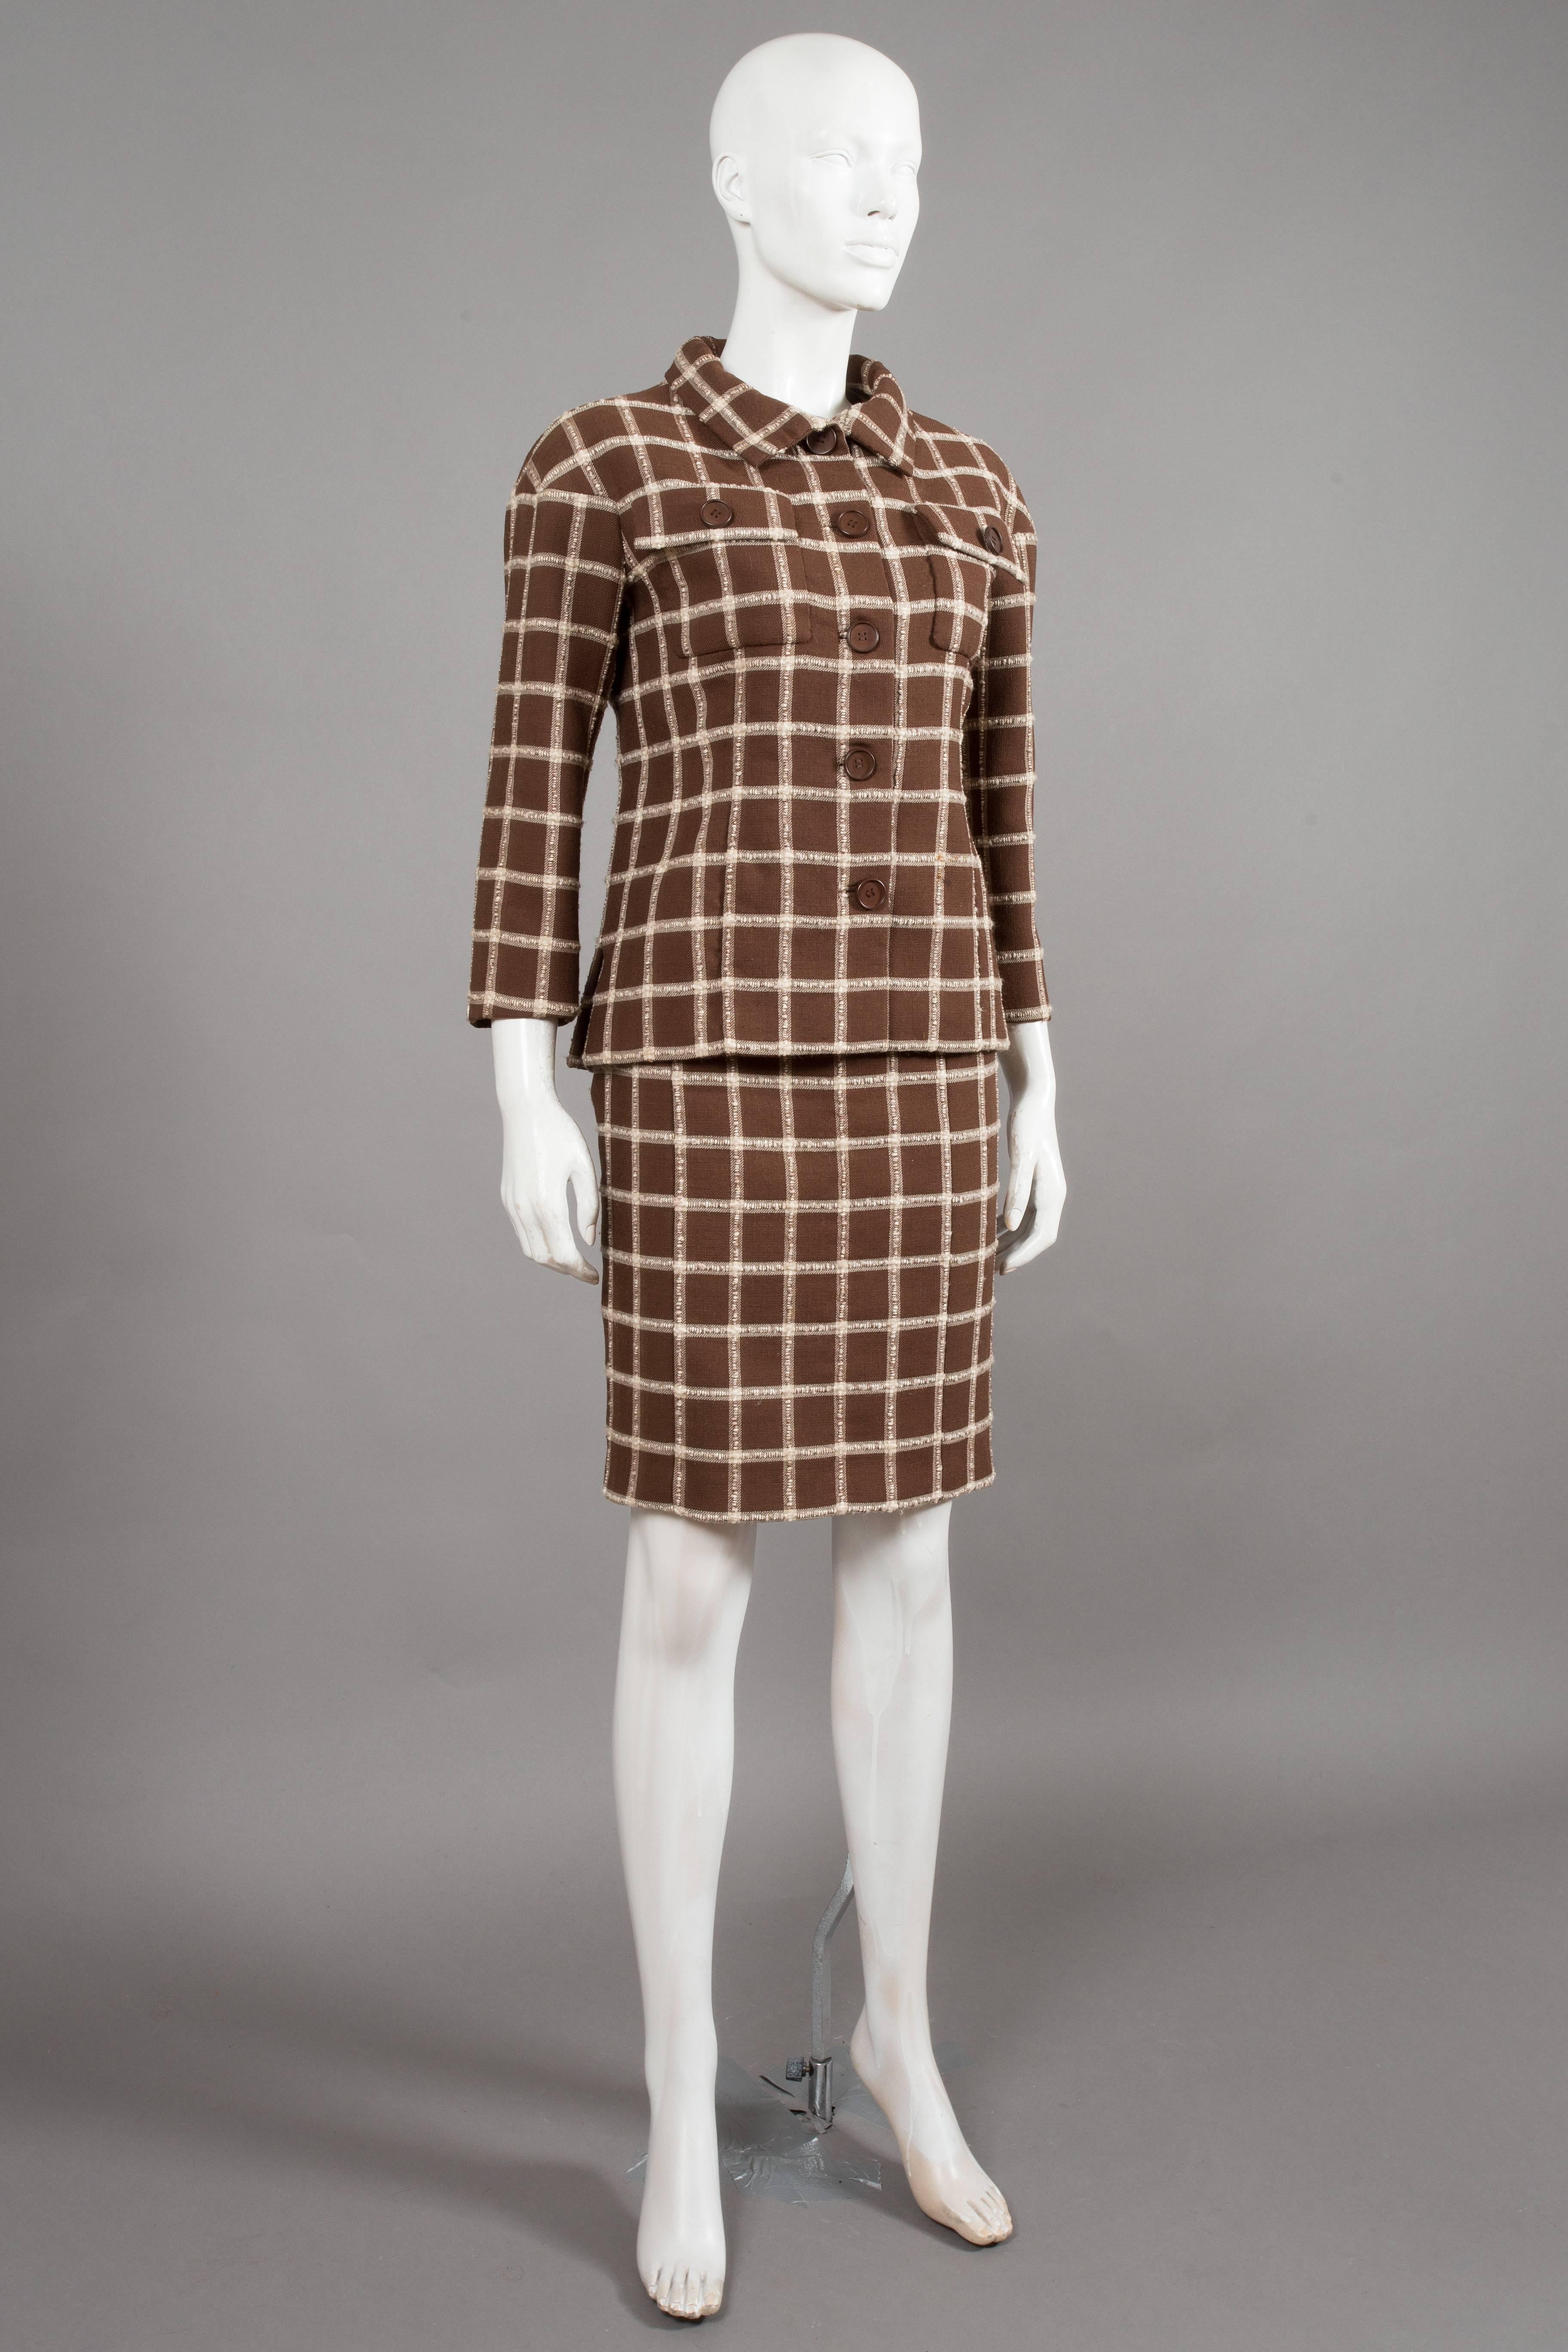 A Balenciaga couture flecked brown and cream checked tweed suit, circa 1965, EISA labelled, tailored jacket with side slits, brown 4 hole flat buttons, two faux pocket flaps on chest and cropped sleeve, over the knee pencil skirt with metal zip